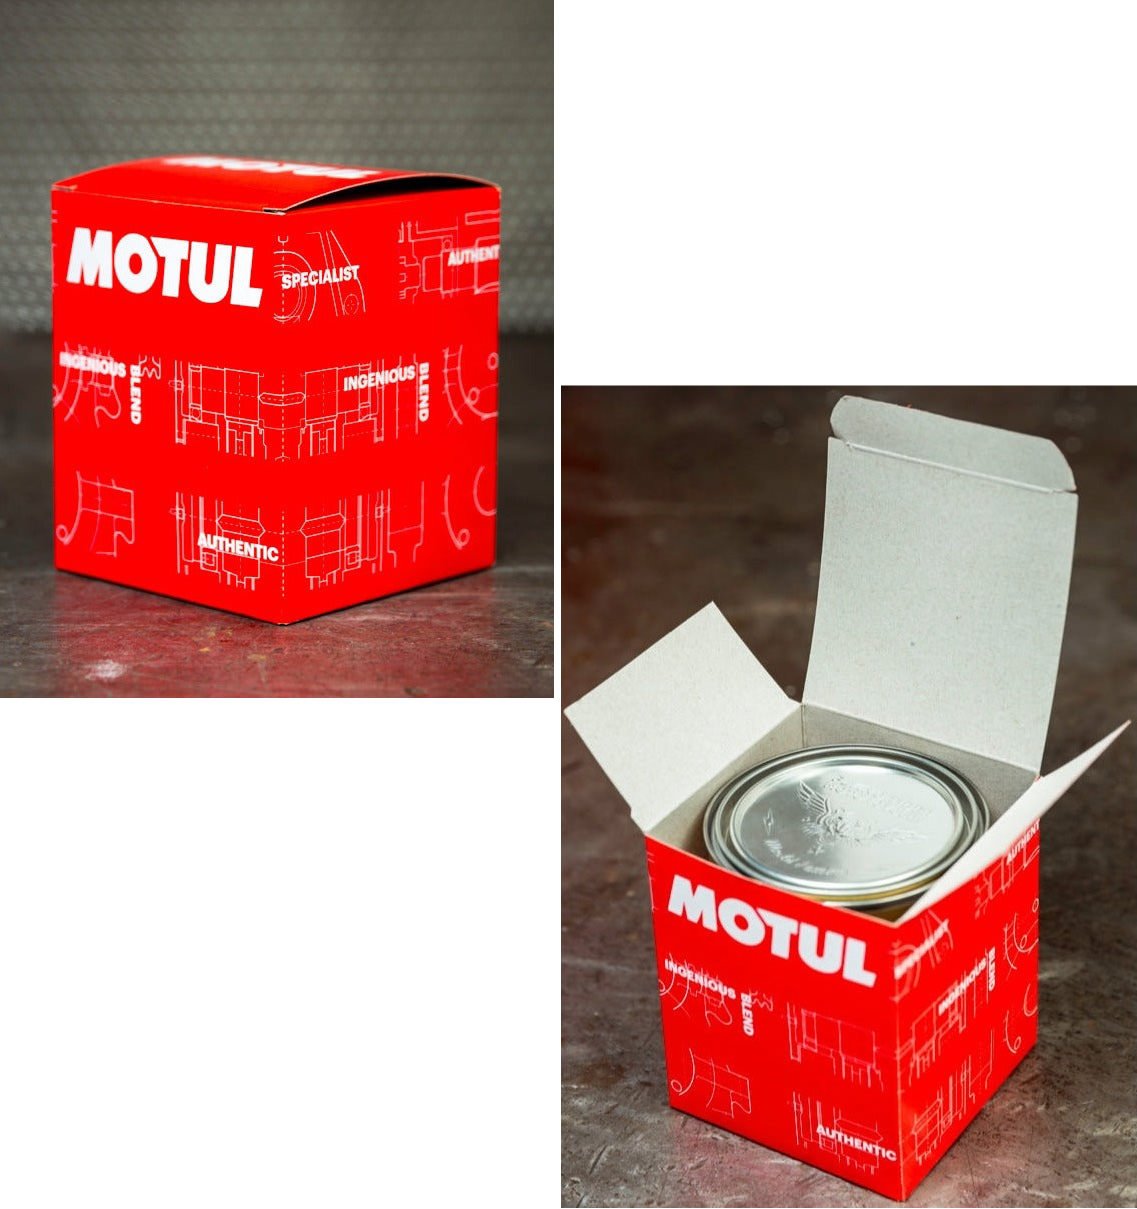 Perfect Christmas Gift: The Motul 800 2T Two Stroke Scented Candle